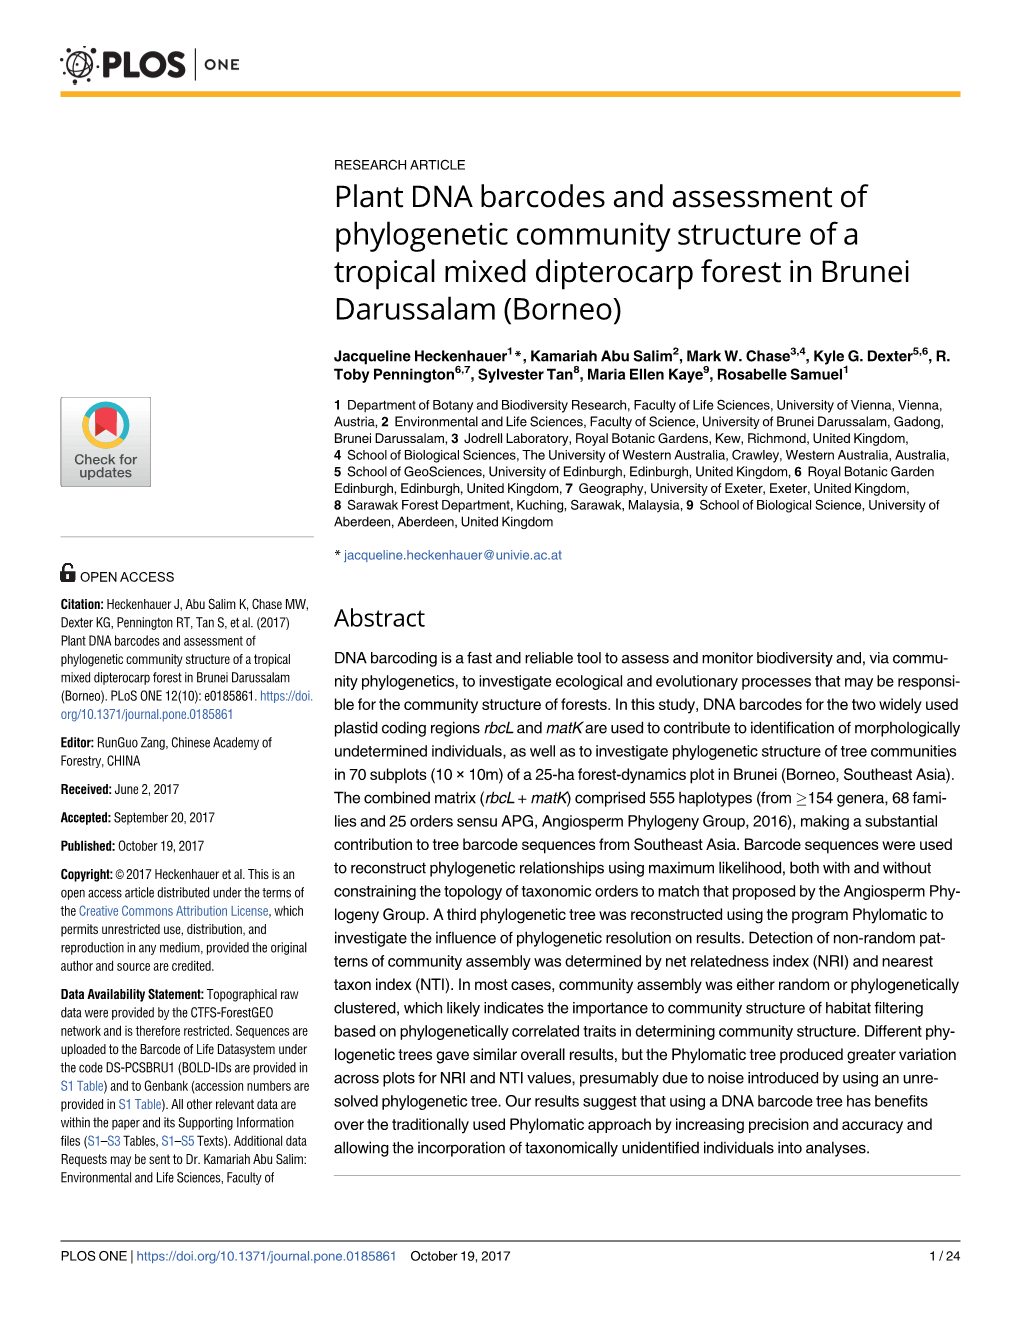 Plant DNA Barcodes and Assessment of Phylogenetic Community Structure of a Tropical Mixed Dipterocarp Forest in Brunei Darussalam (Borneo)